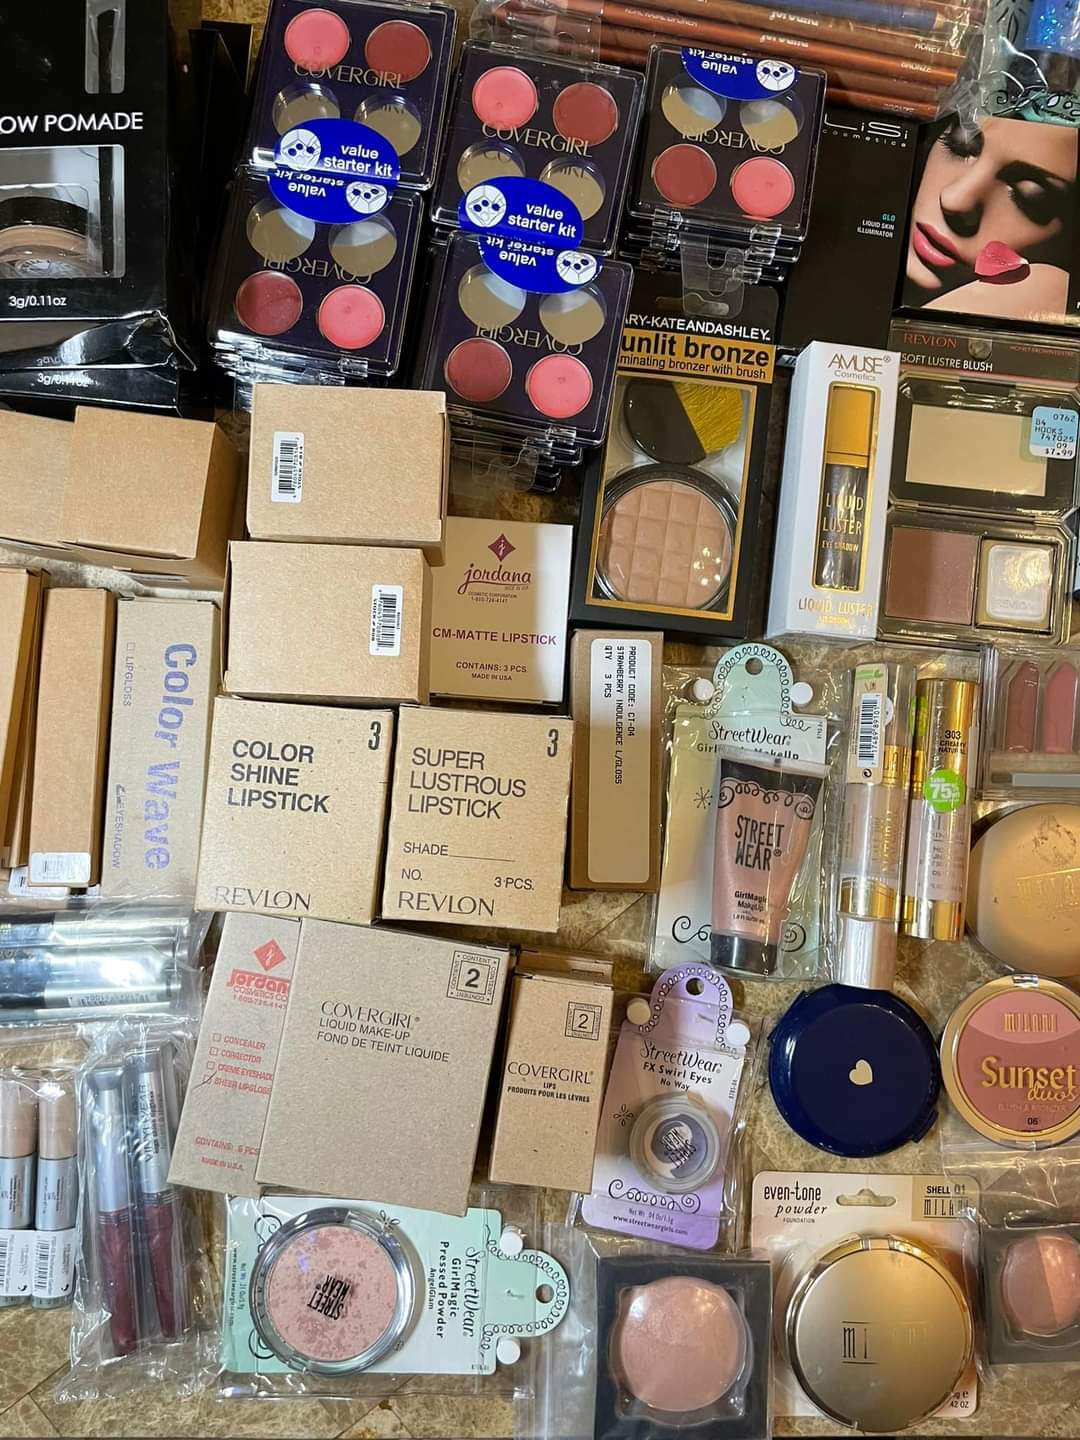 <span style="font-weight: bold;">COSMETICS PALLETS</span><br>